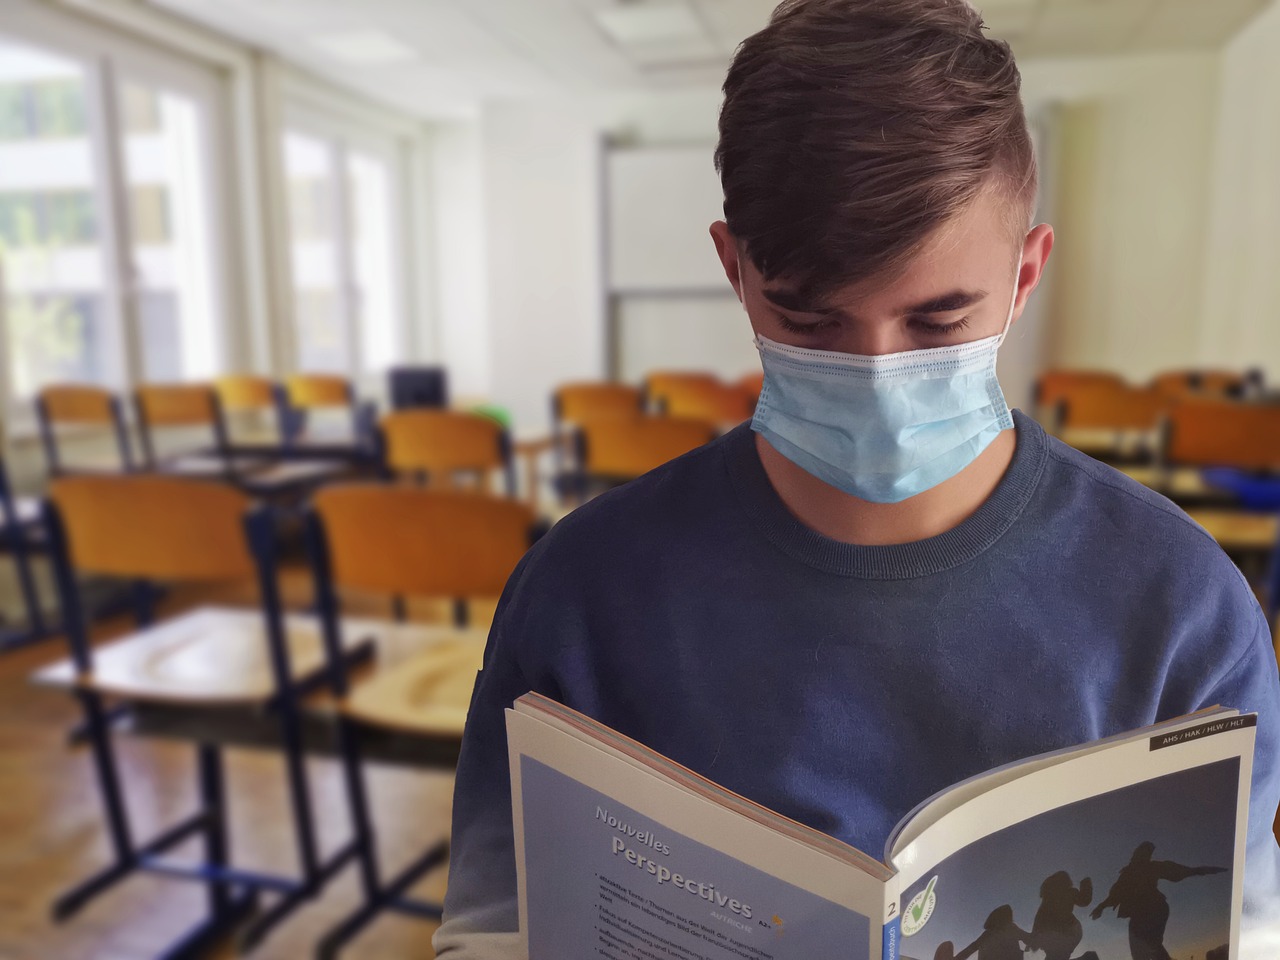 Making the Most Out of Your Medical School Education